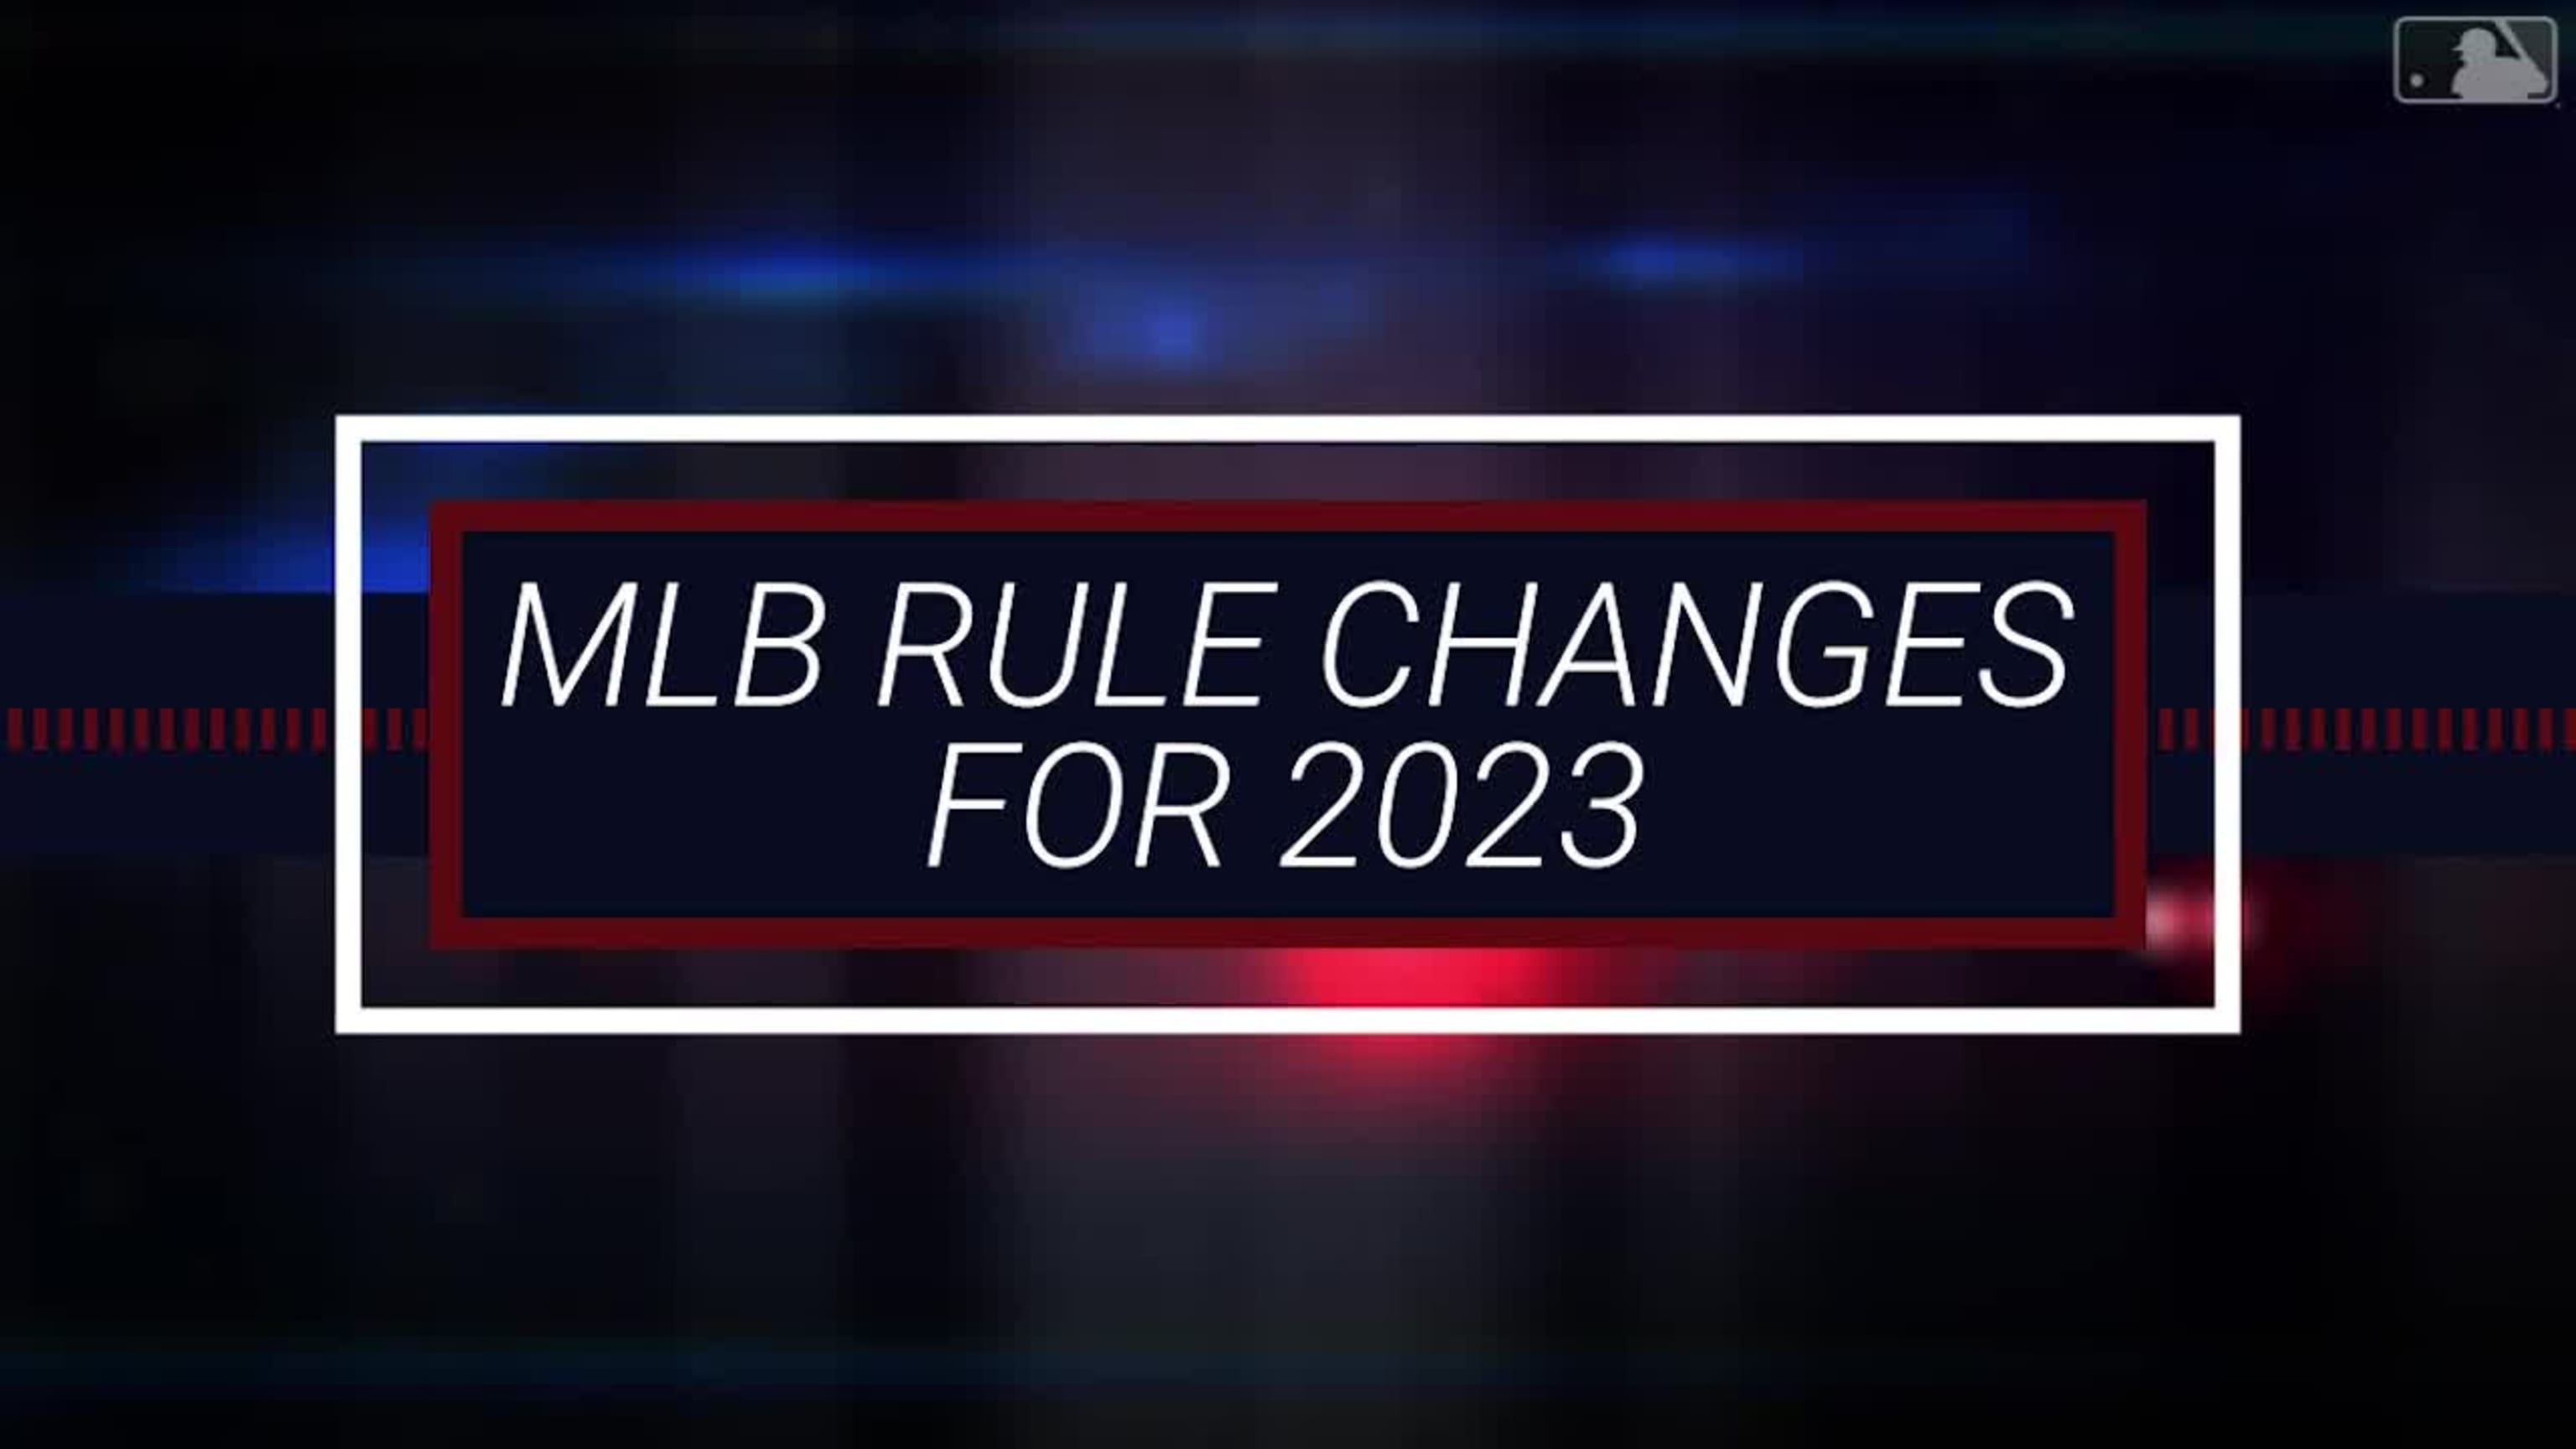 Red Sox uniforms will be unaffected by new MLB rules in 2023